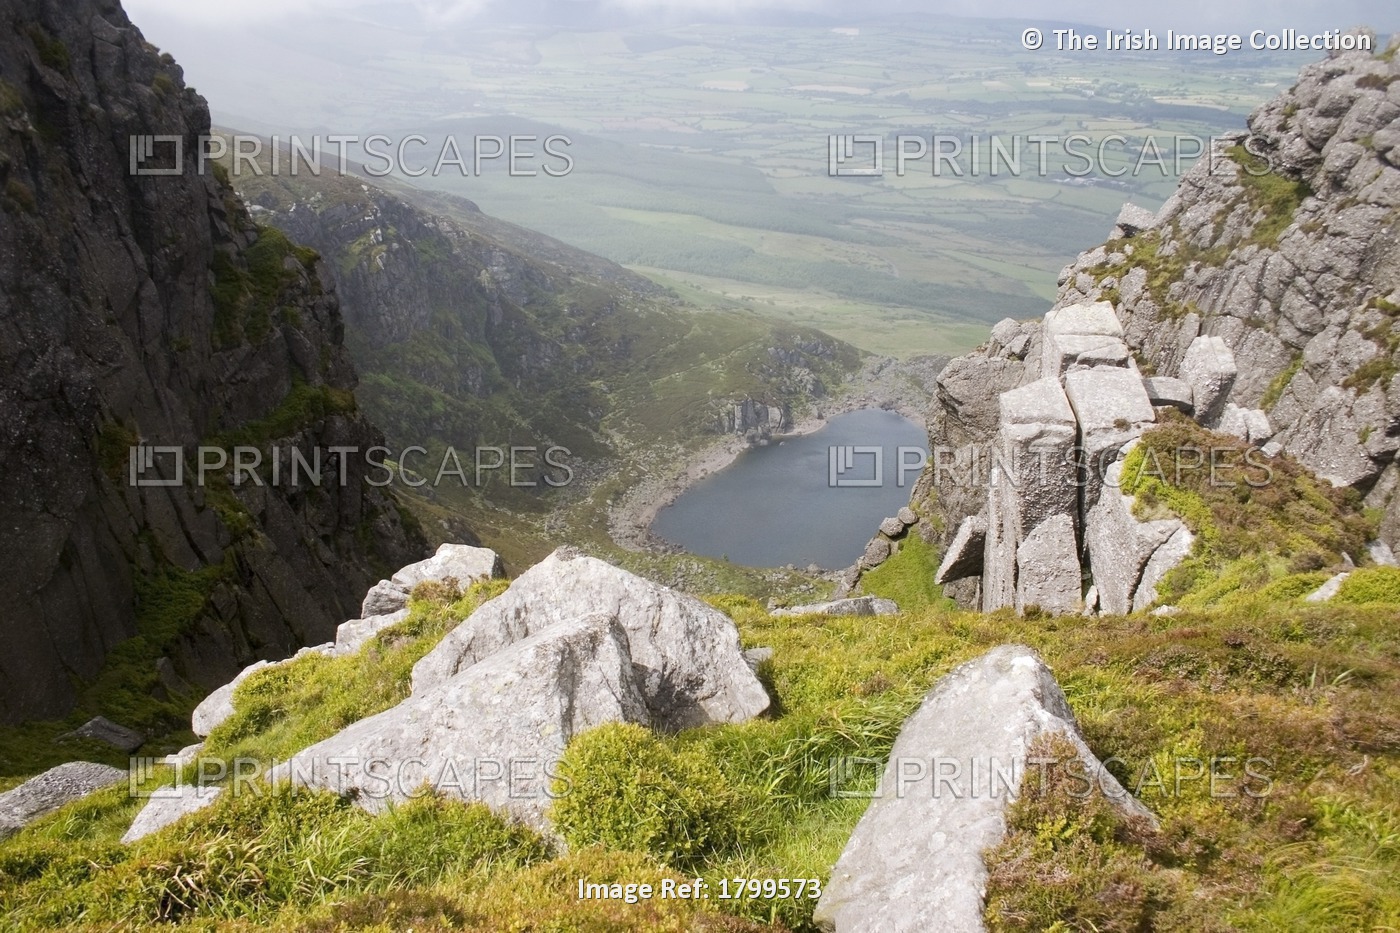 Crotty's Rock, Comeragh Mountains, County Waterford, Ireland